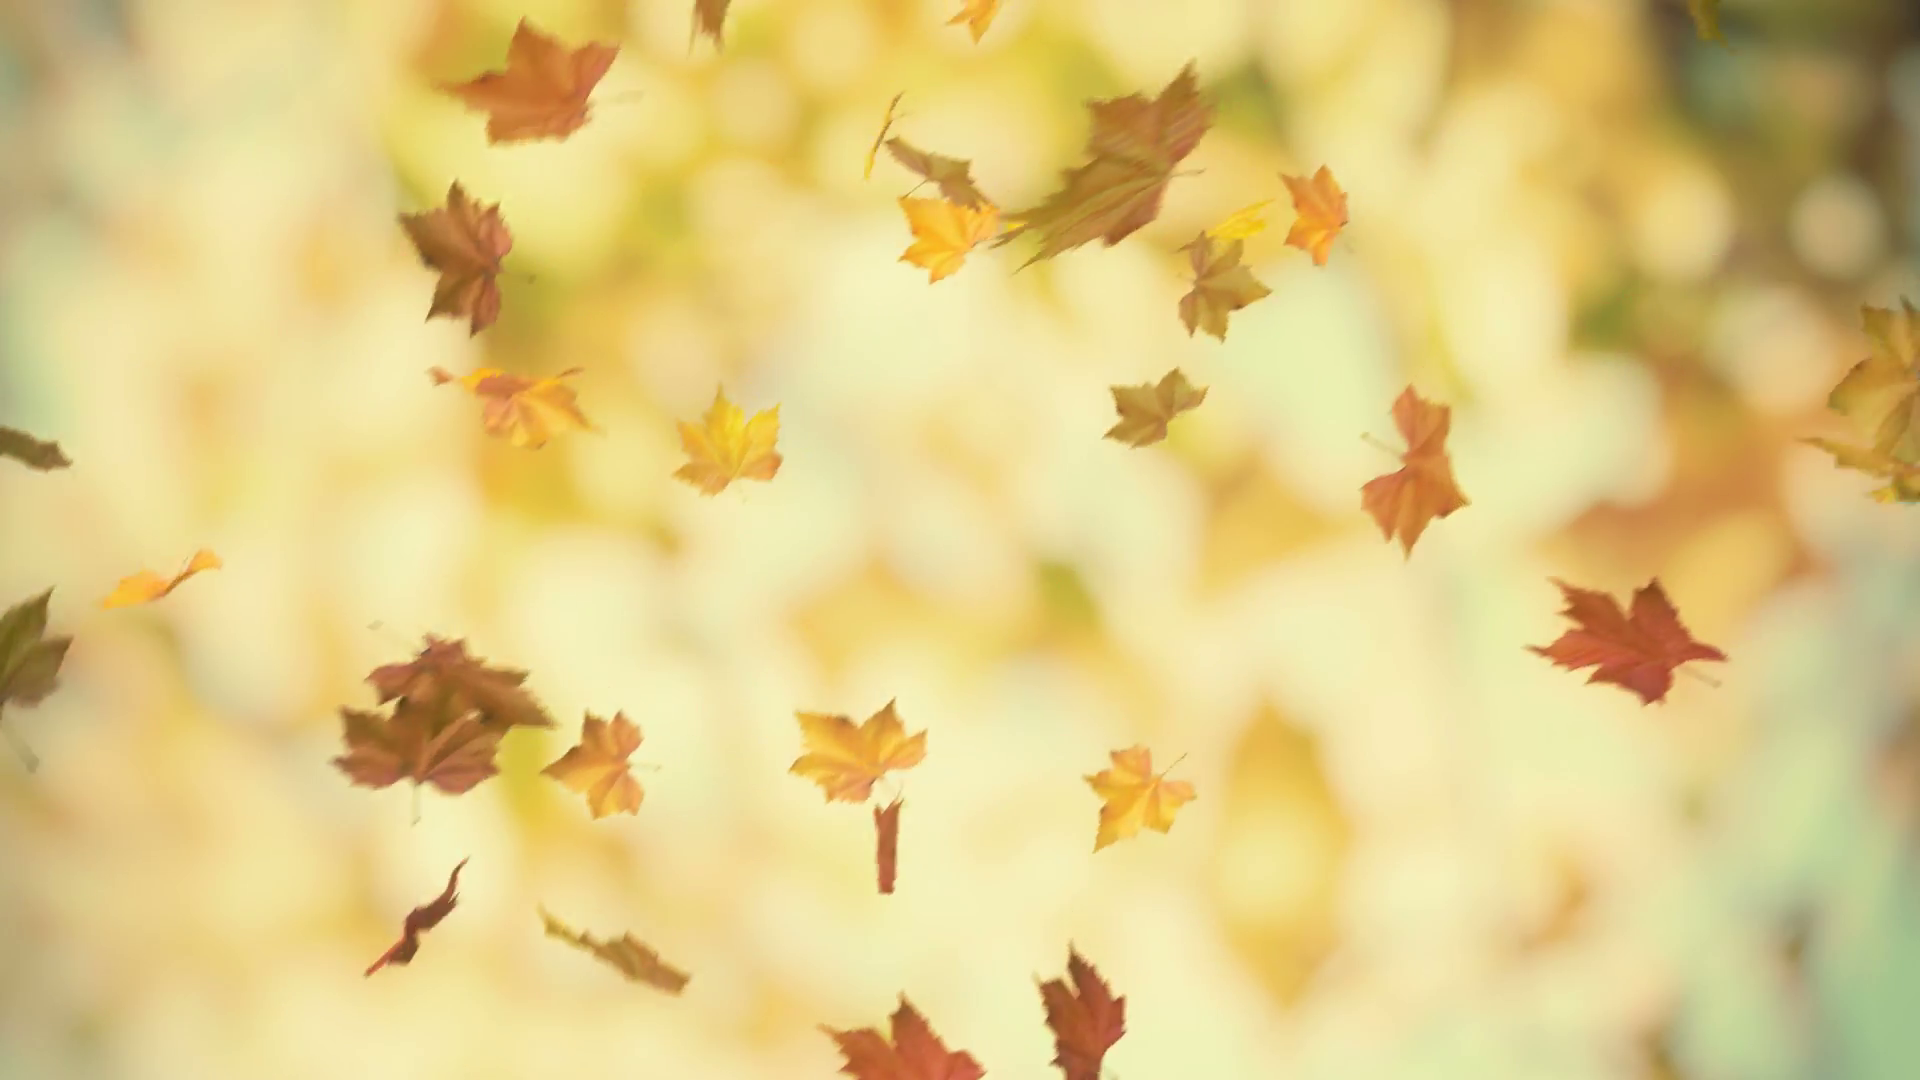 Autumn falling leaves - loopable background Motion Background ...